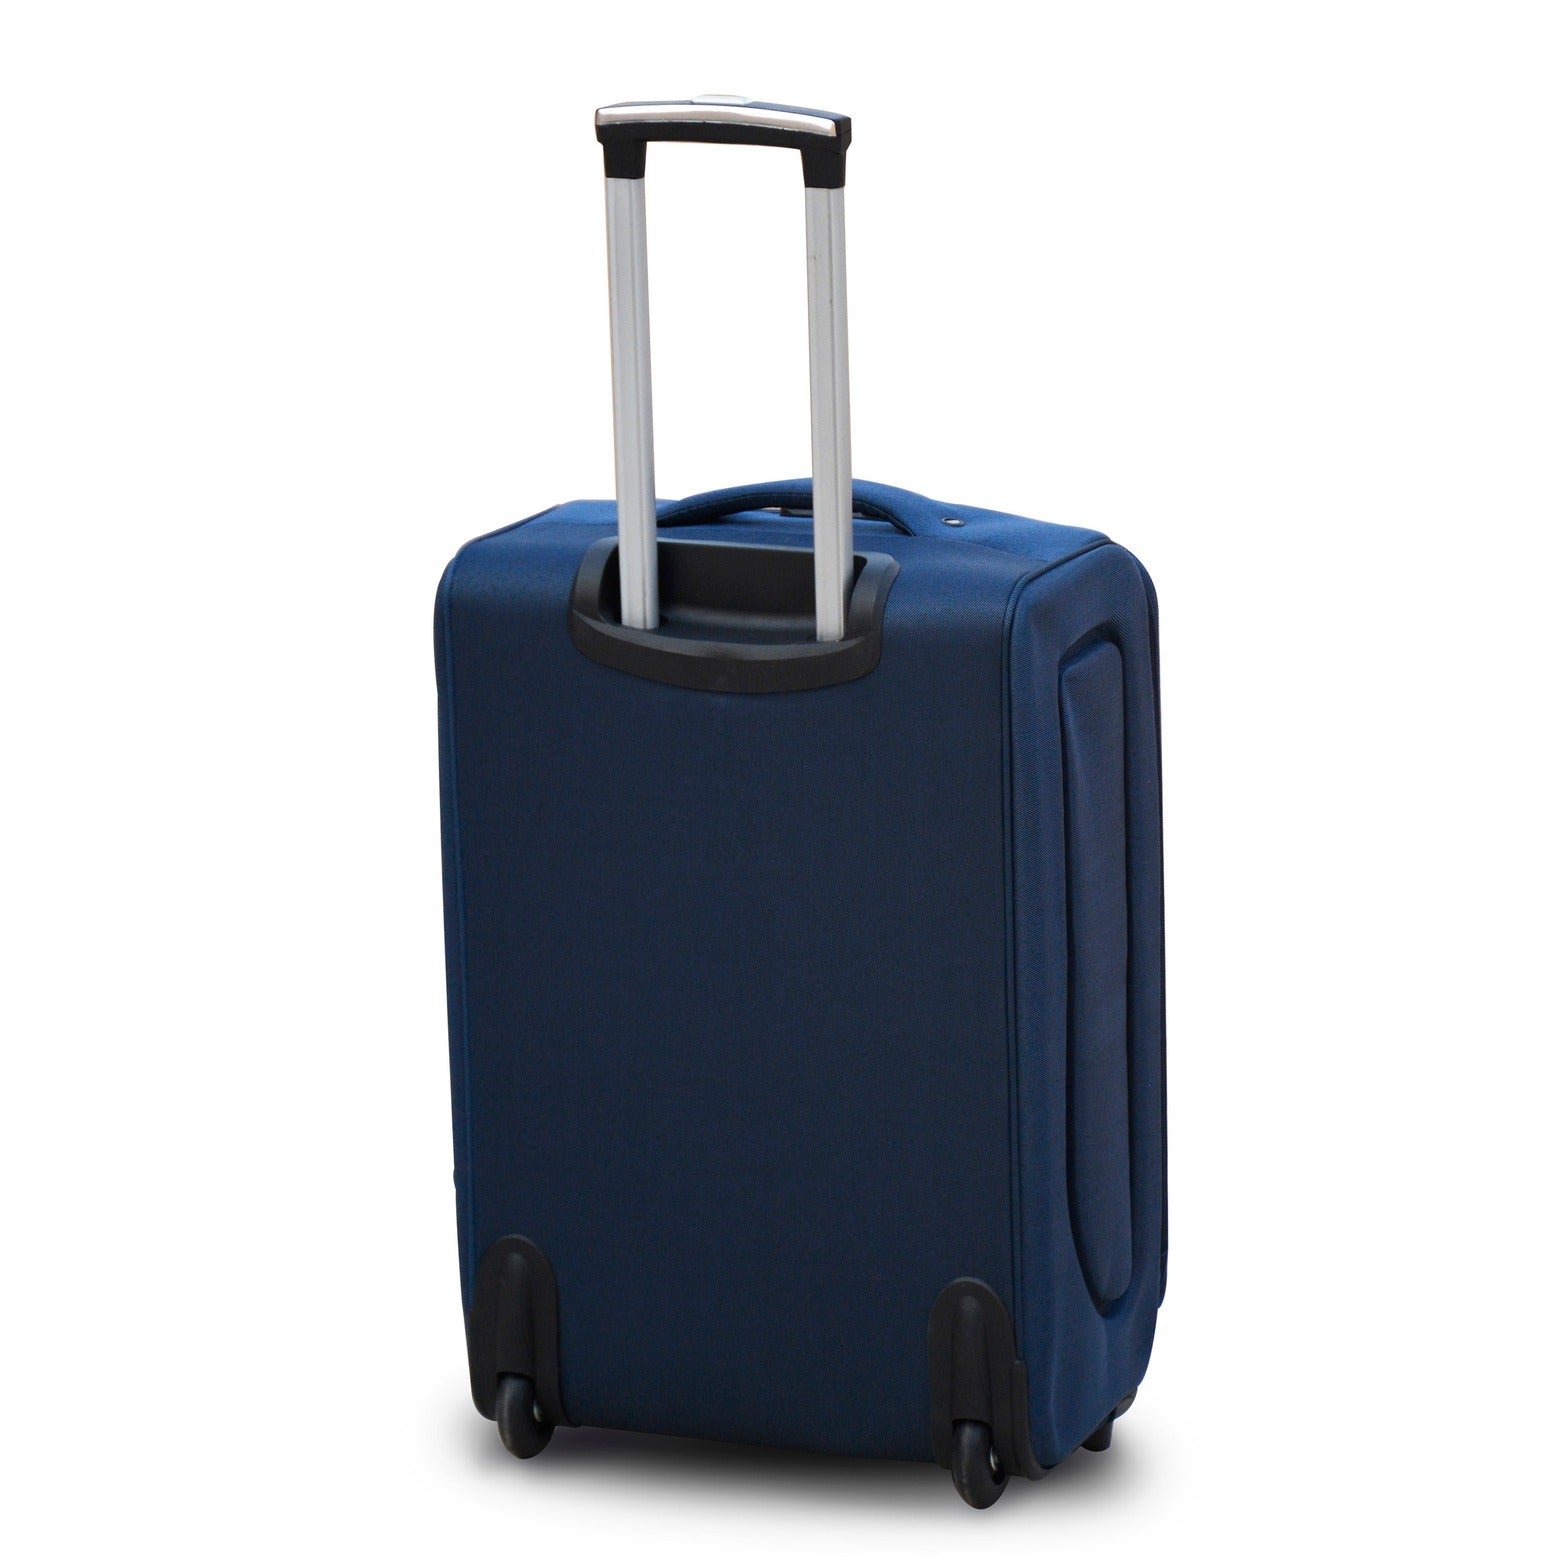 20" Blue Colour LP 2 Wheel 0161 Luggage Lightweight Soft Material Carry On Trolley Bag Zaappy.com